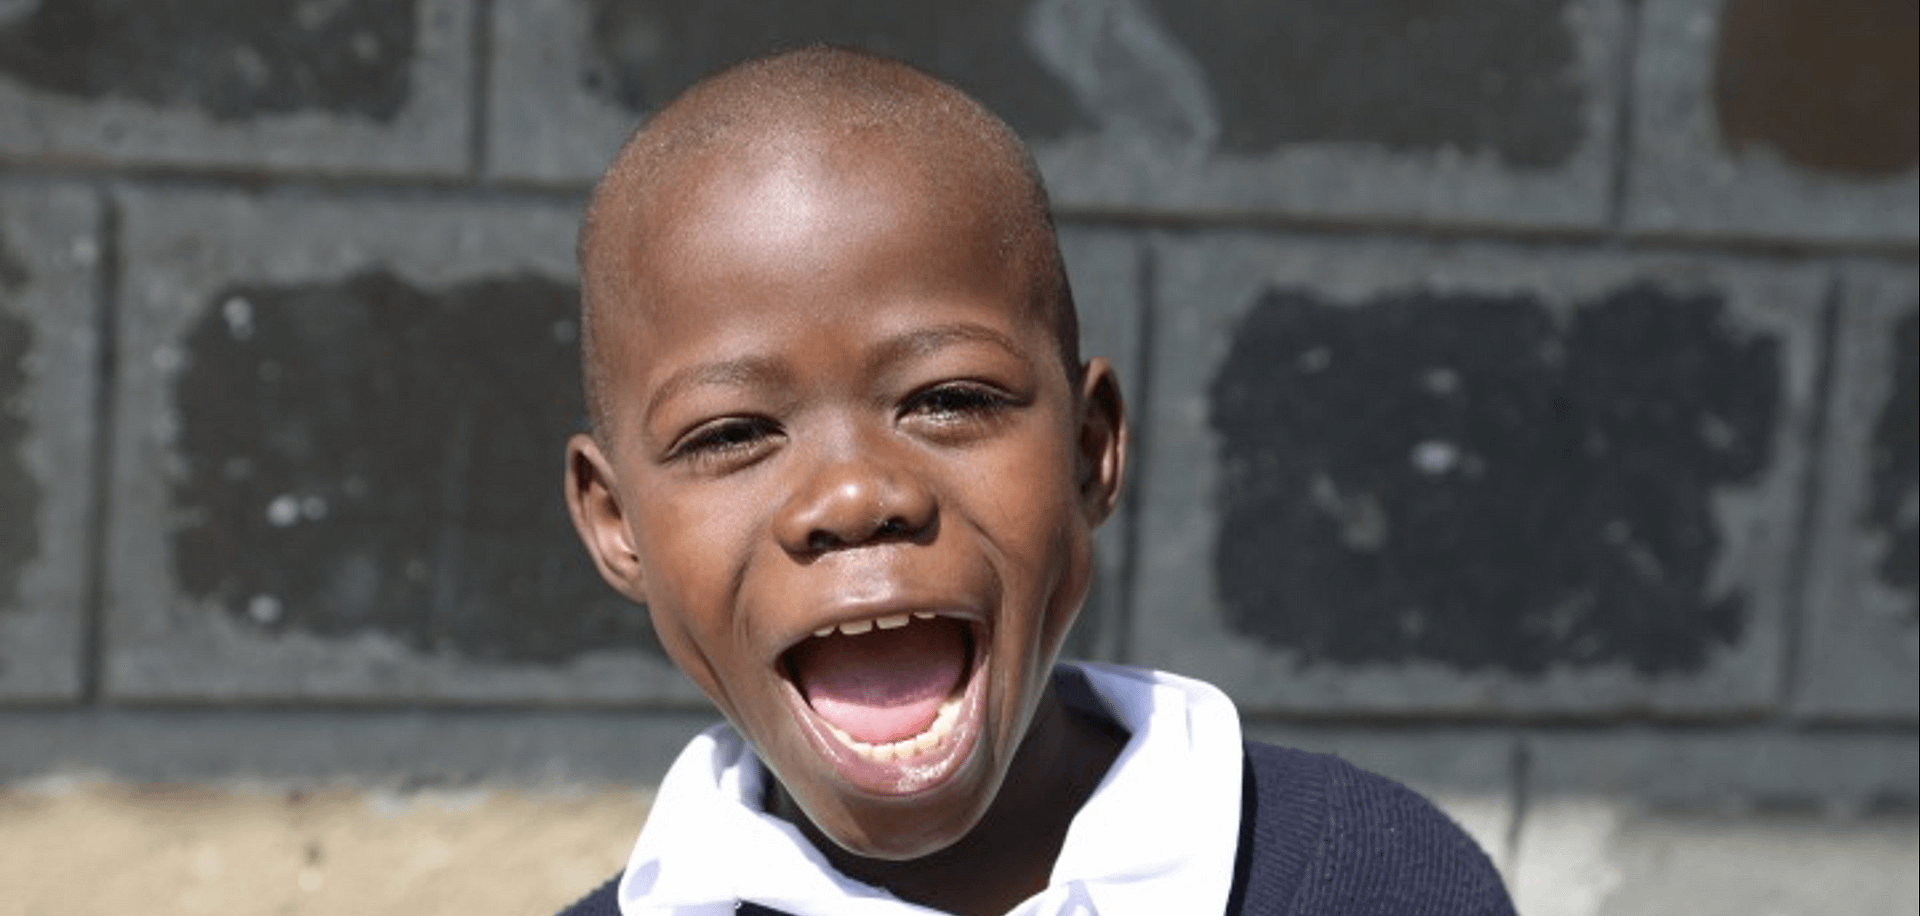 African boy with a large smile!